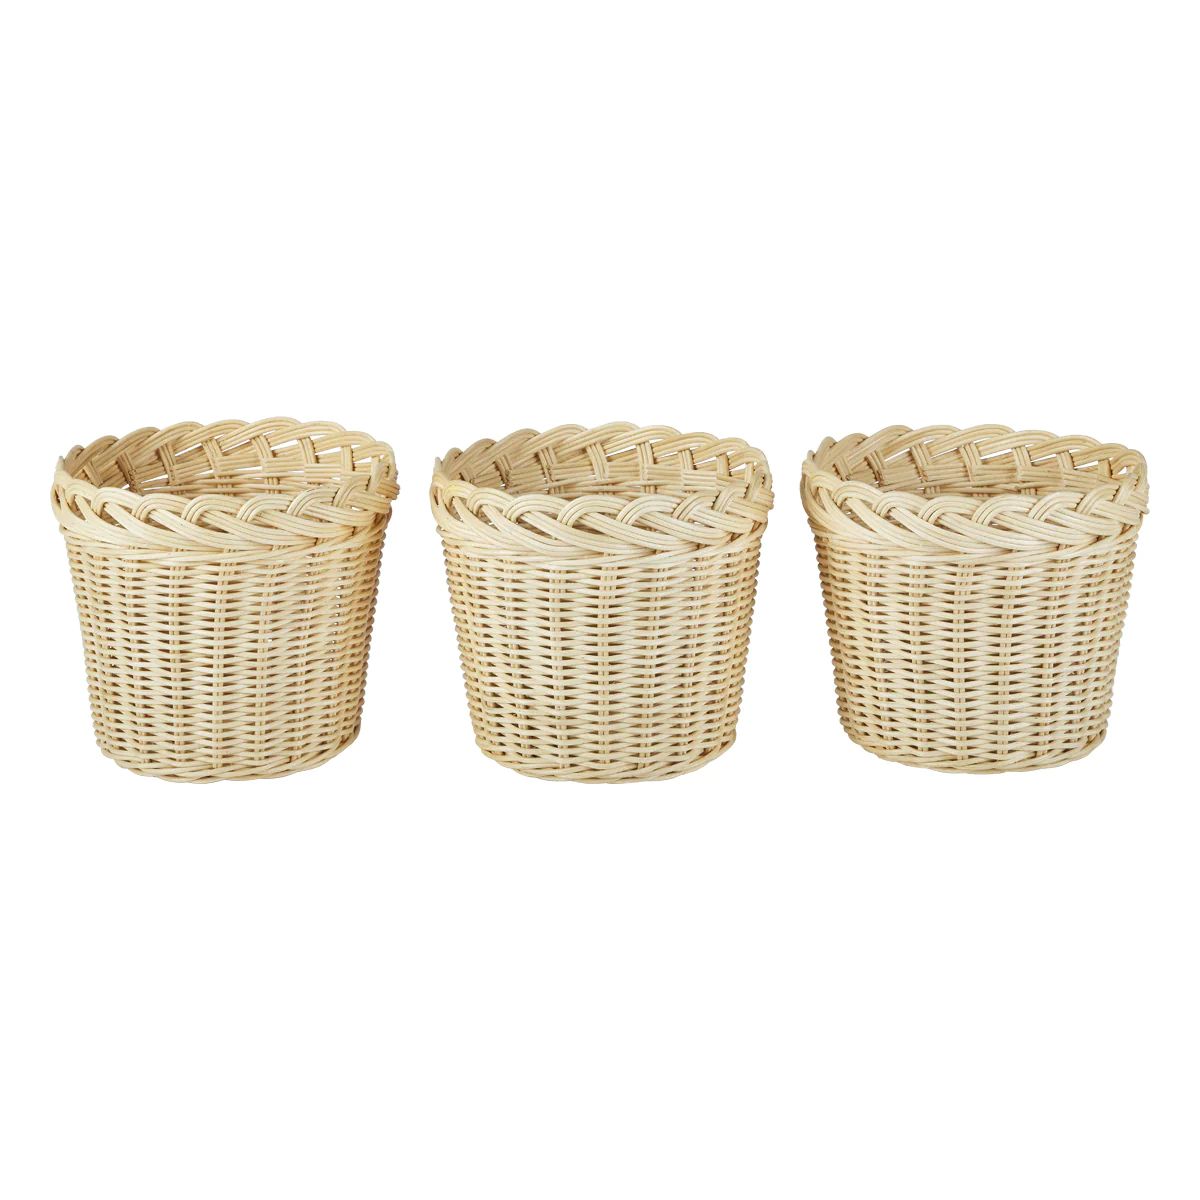 Braided Orchid Baskets Small, Set of 3 | Amanda Lindroth